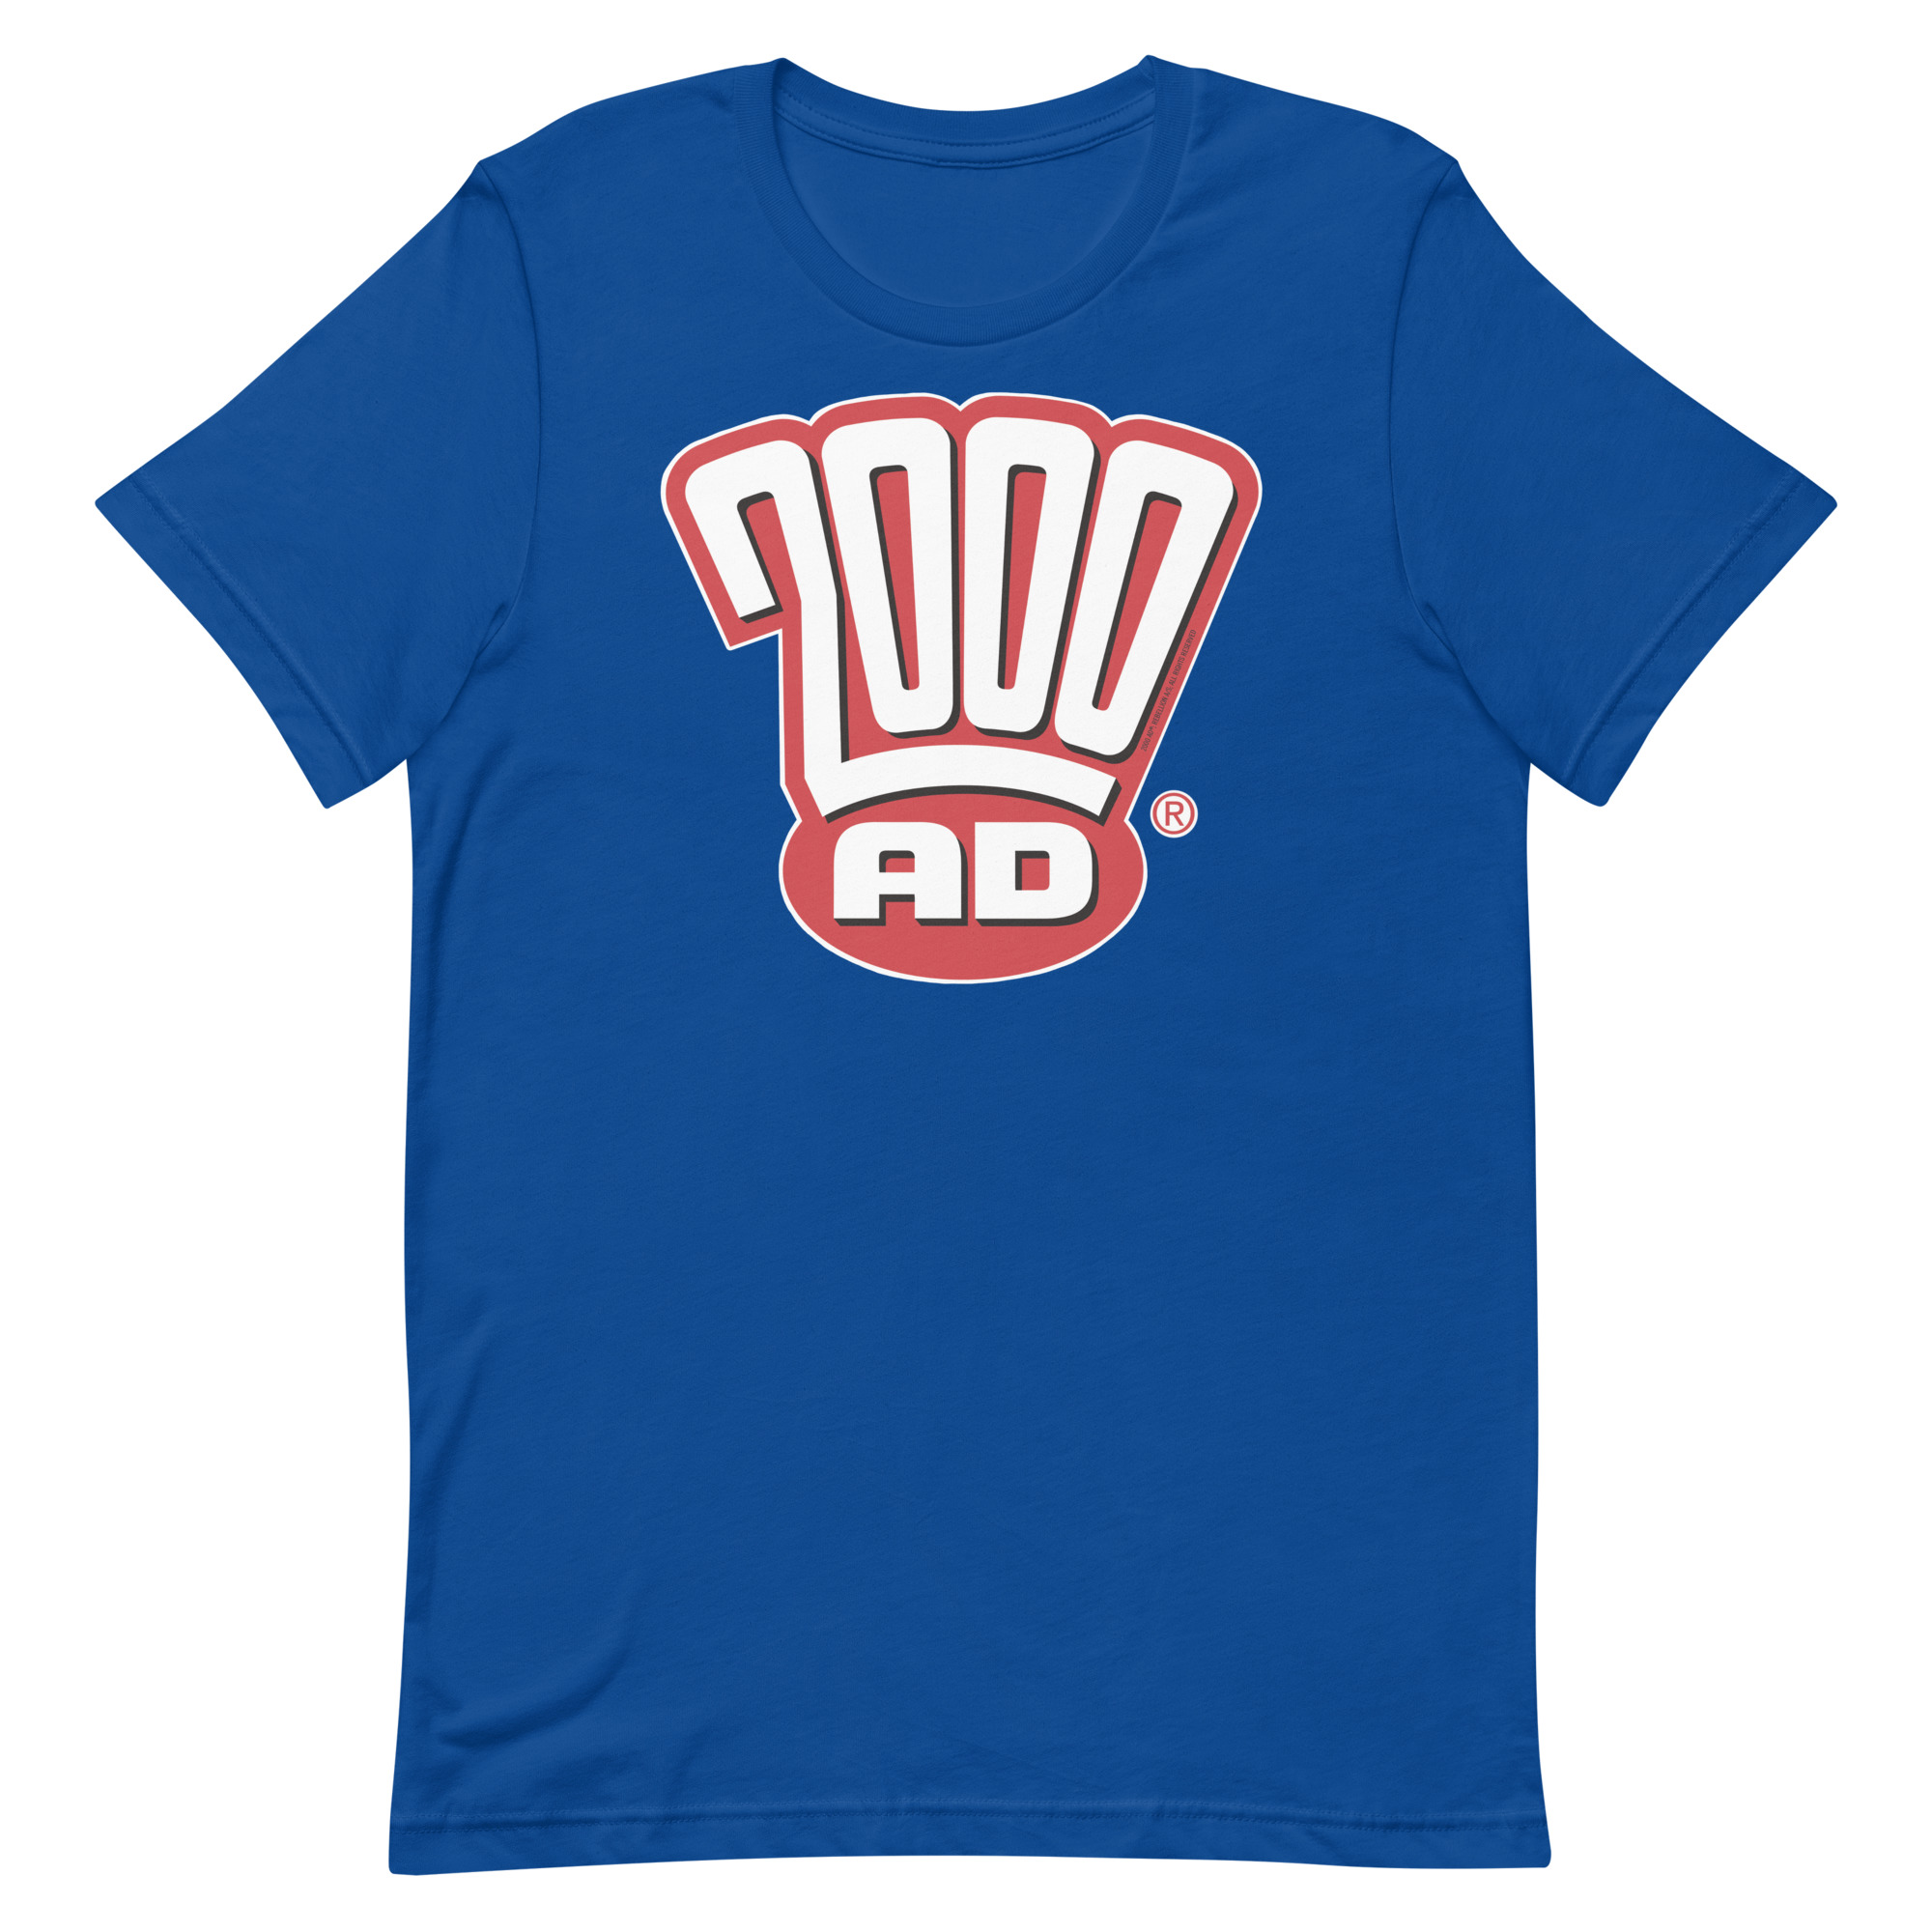 Image of a Royal Blue coloured 2000AD - The Modern Era t-shirt featuring a large 2000AD - The Modern Era logo in the middle